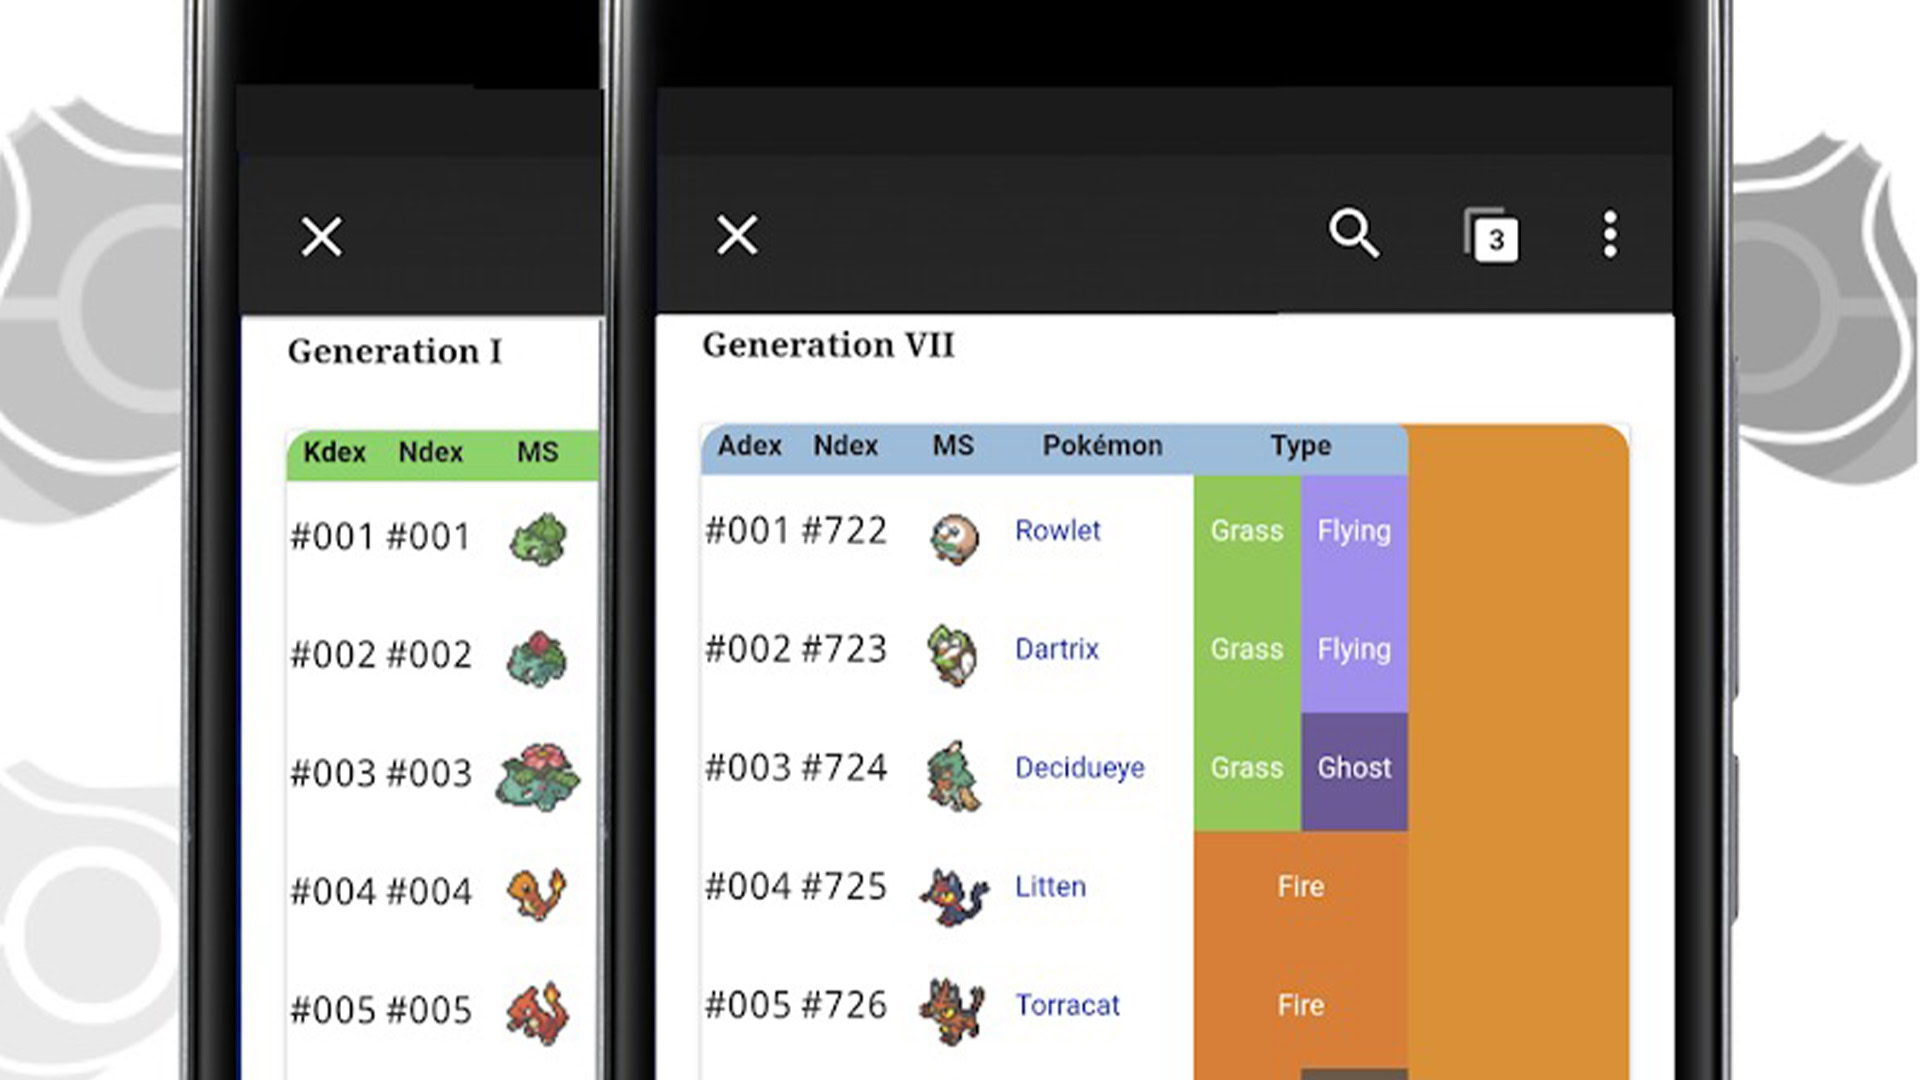 The best Pokemon apps (not games) for Android - Android Authority